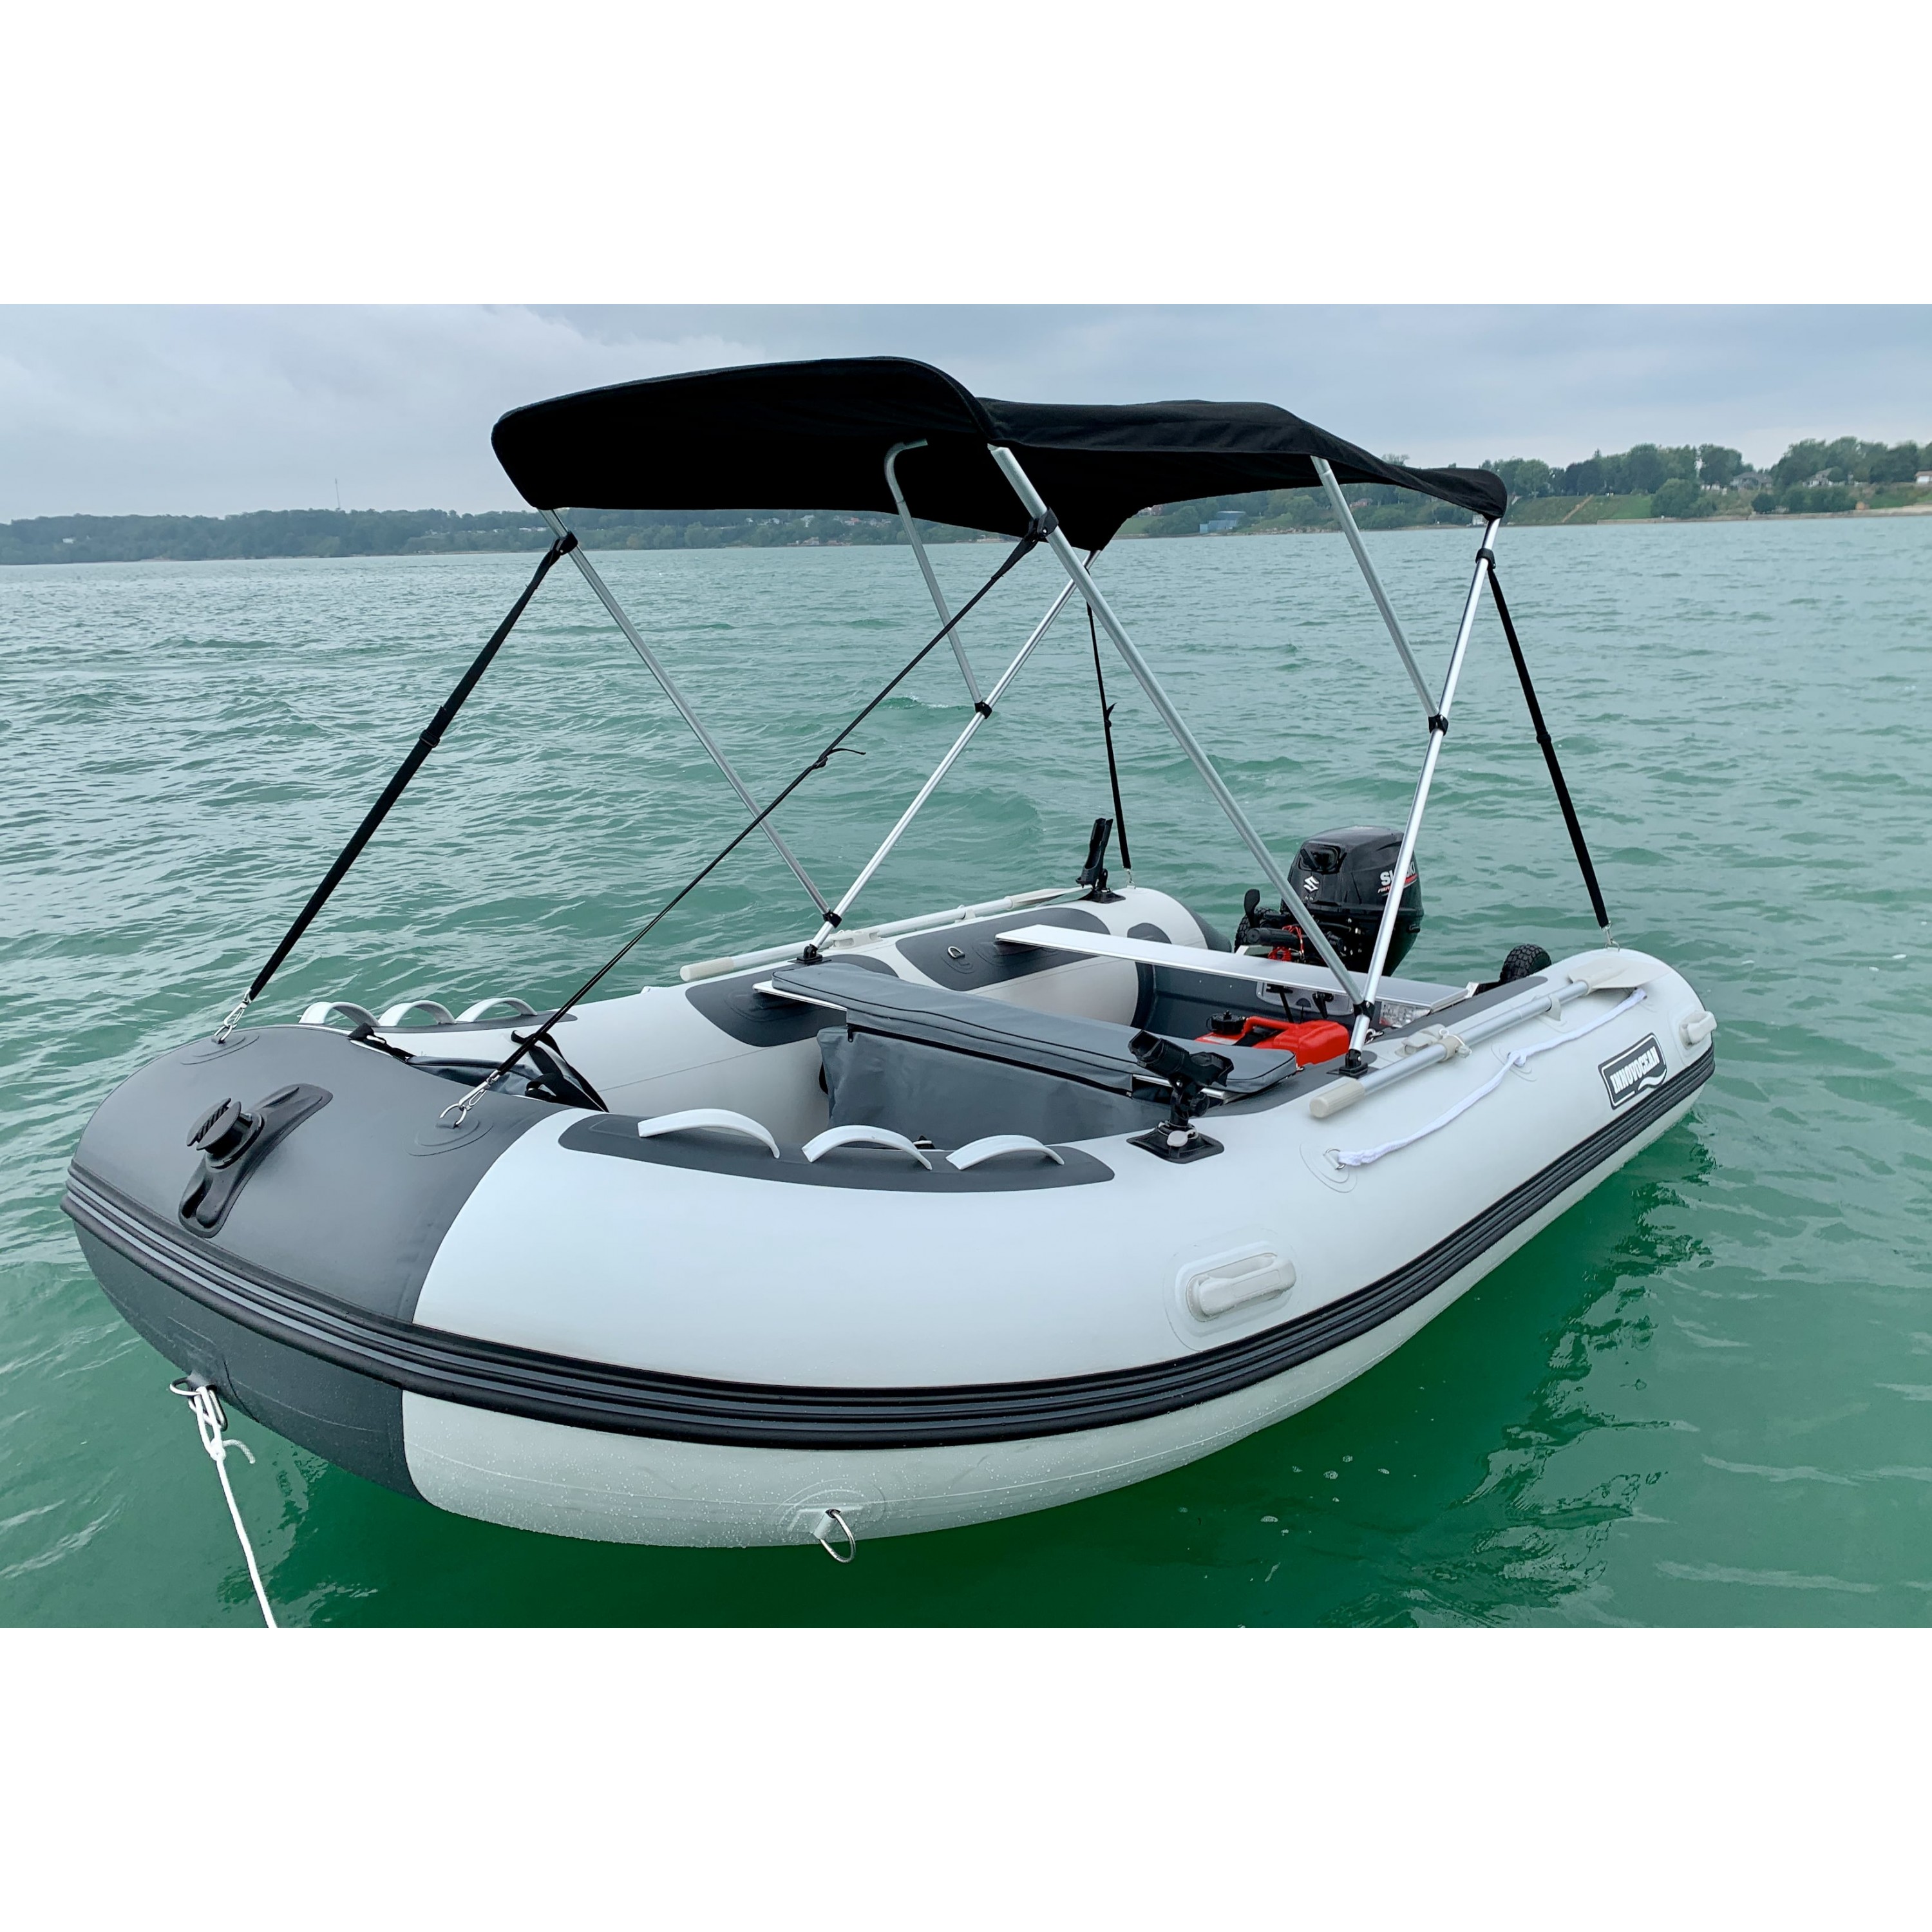 MA330 11ft Metal Master Gray Inflatable Boat